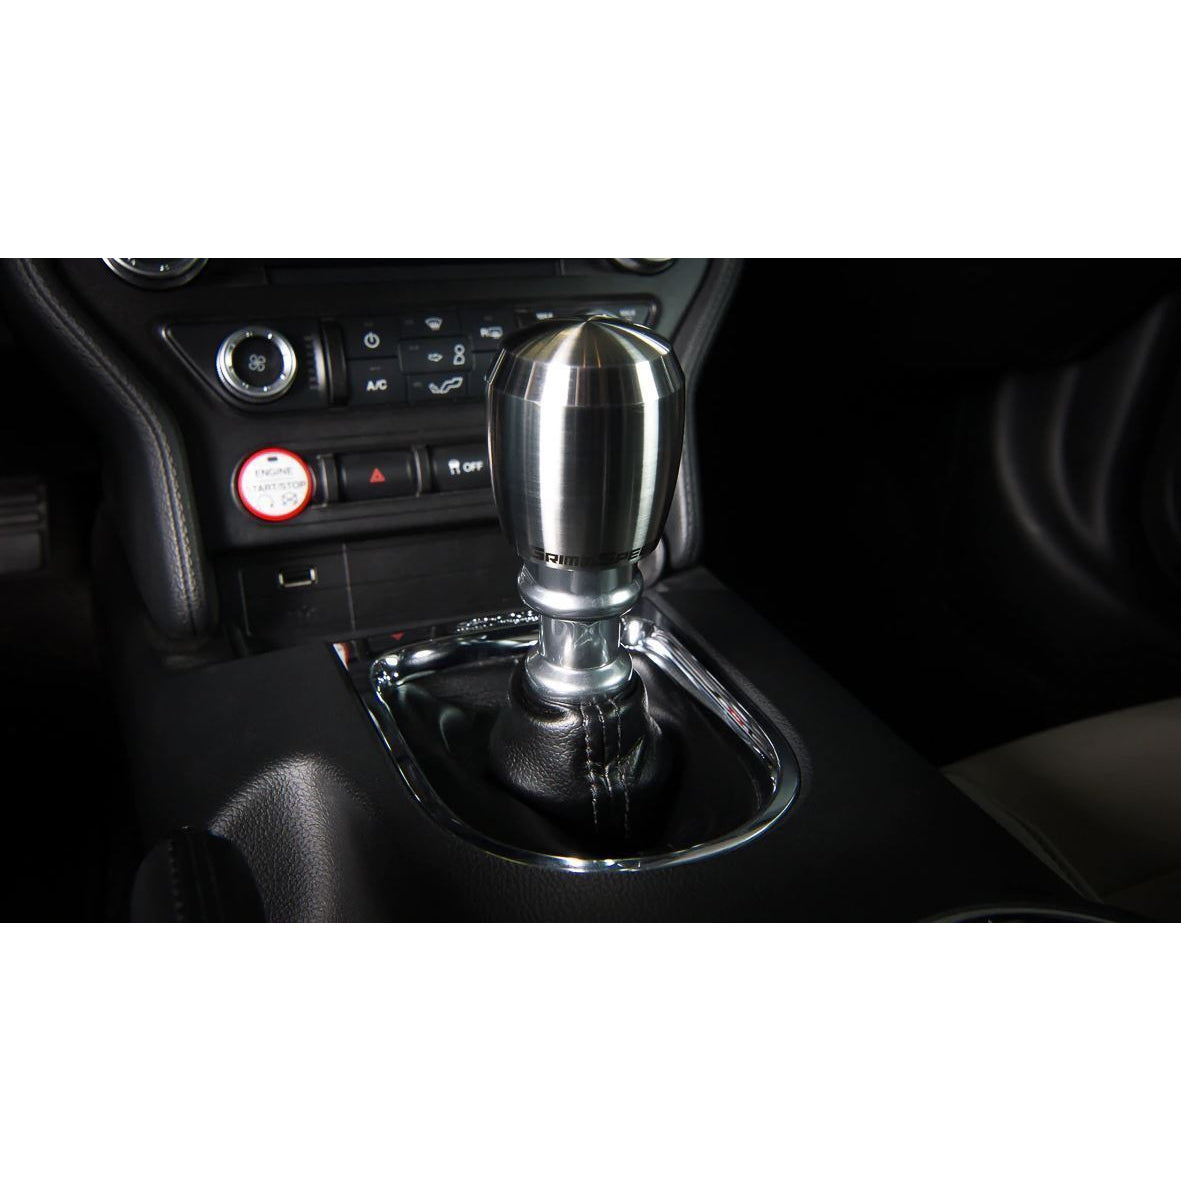 GrimmSpeed Shift Knob Stainless Steel M12x1.25 Subaru/Ford/Toyota/Scion (038011 / 038012)-Shift Knobs-GrimmSpeed-JDMuscle